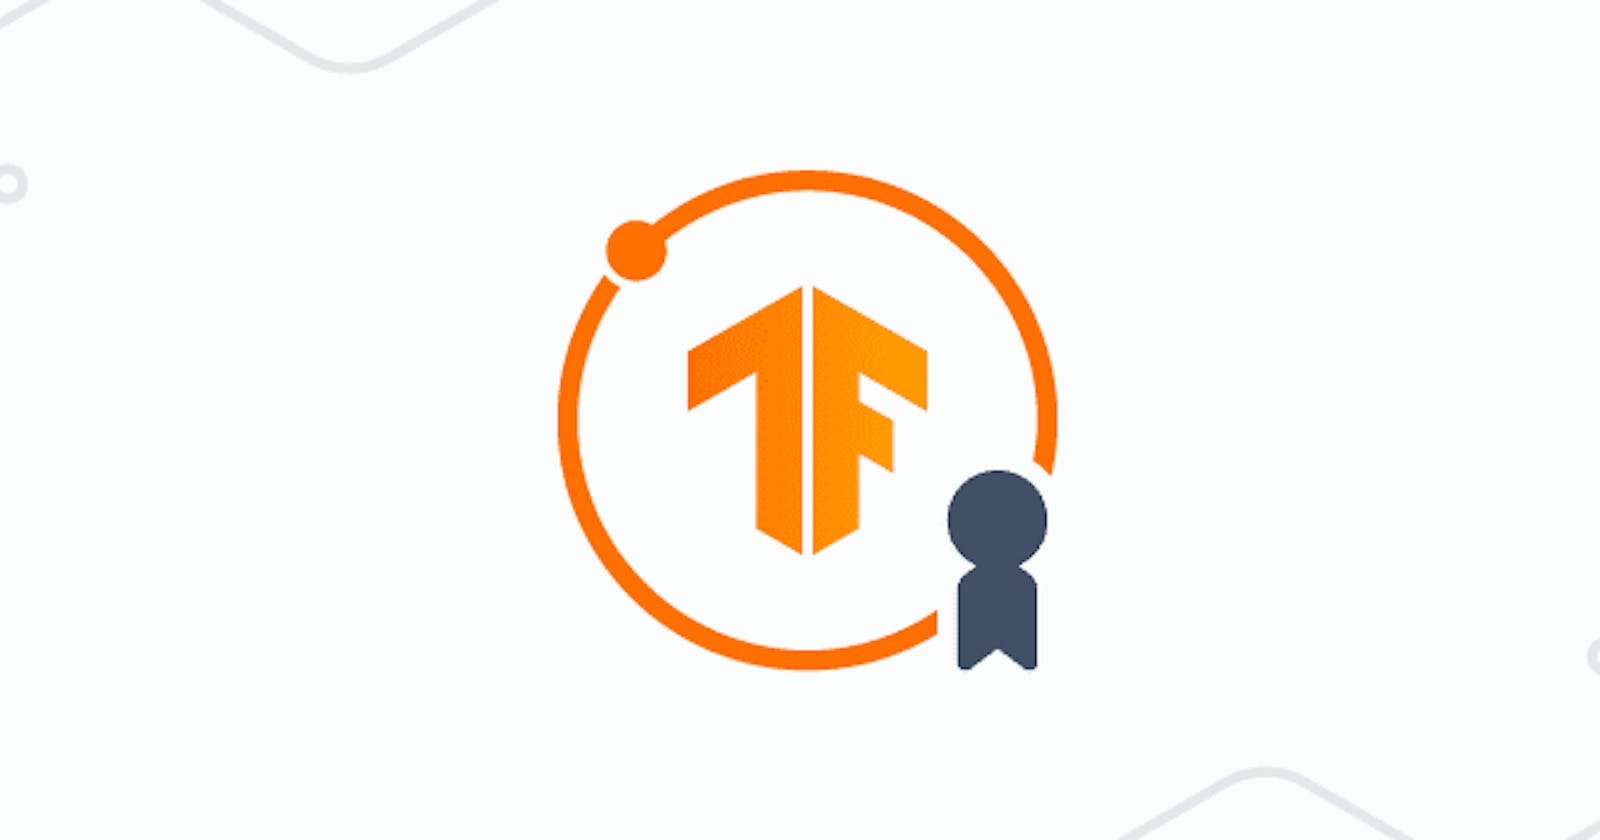 Everything you need to know about TensorFlow Certification Exam